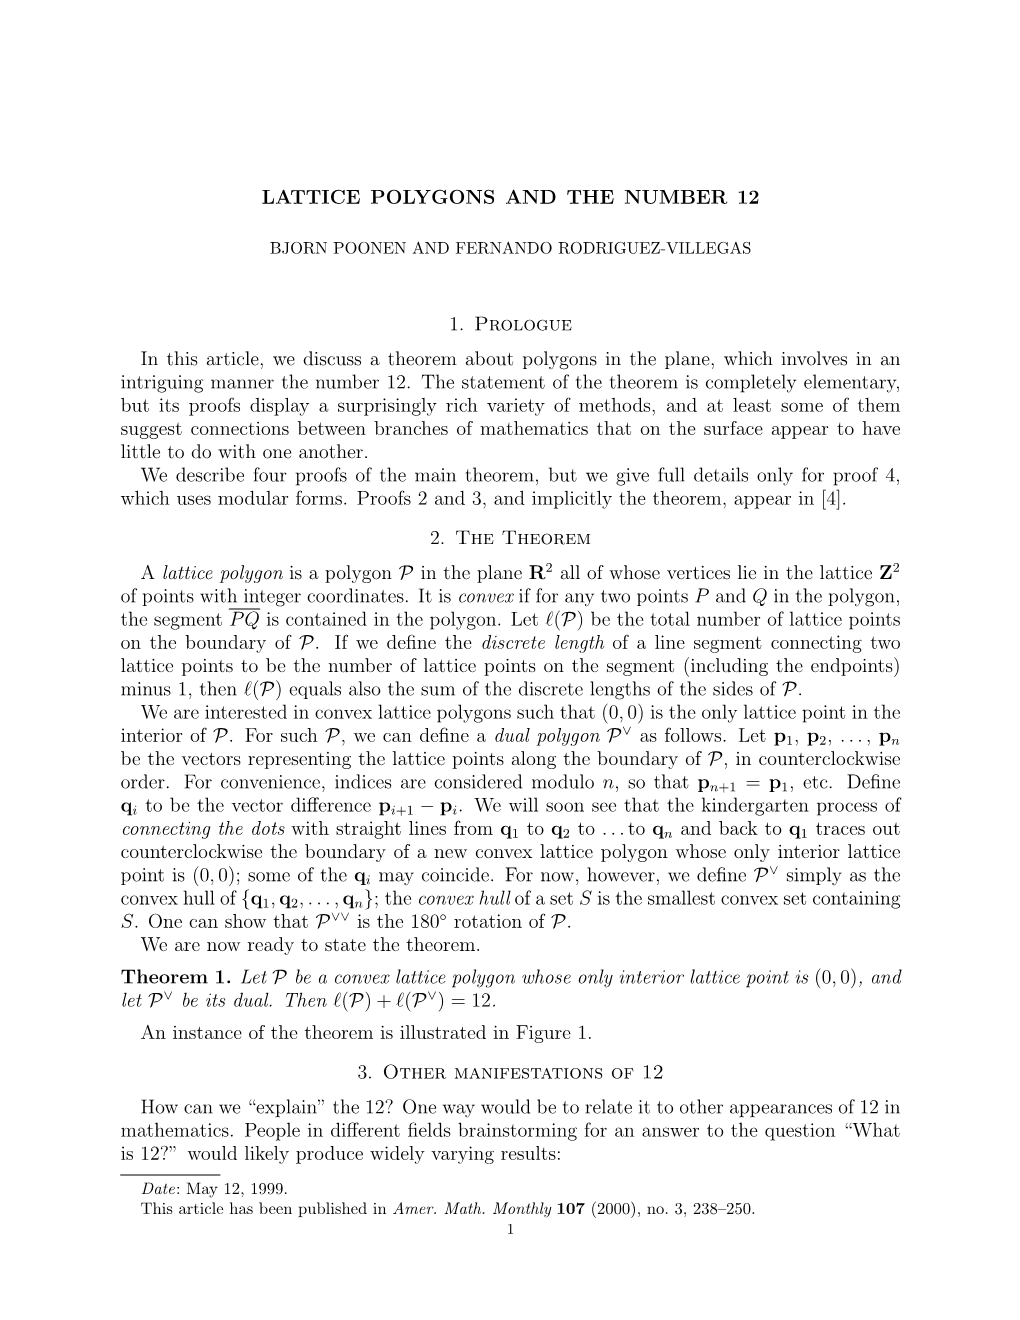 LATTICE POLYGONS and the NUMBER 12 1. Prologue in This